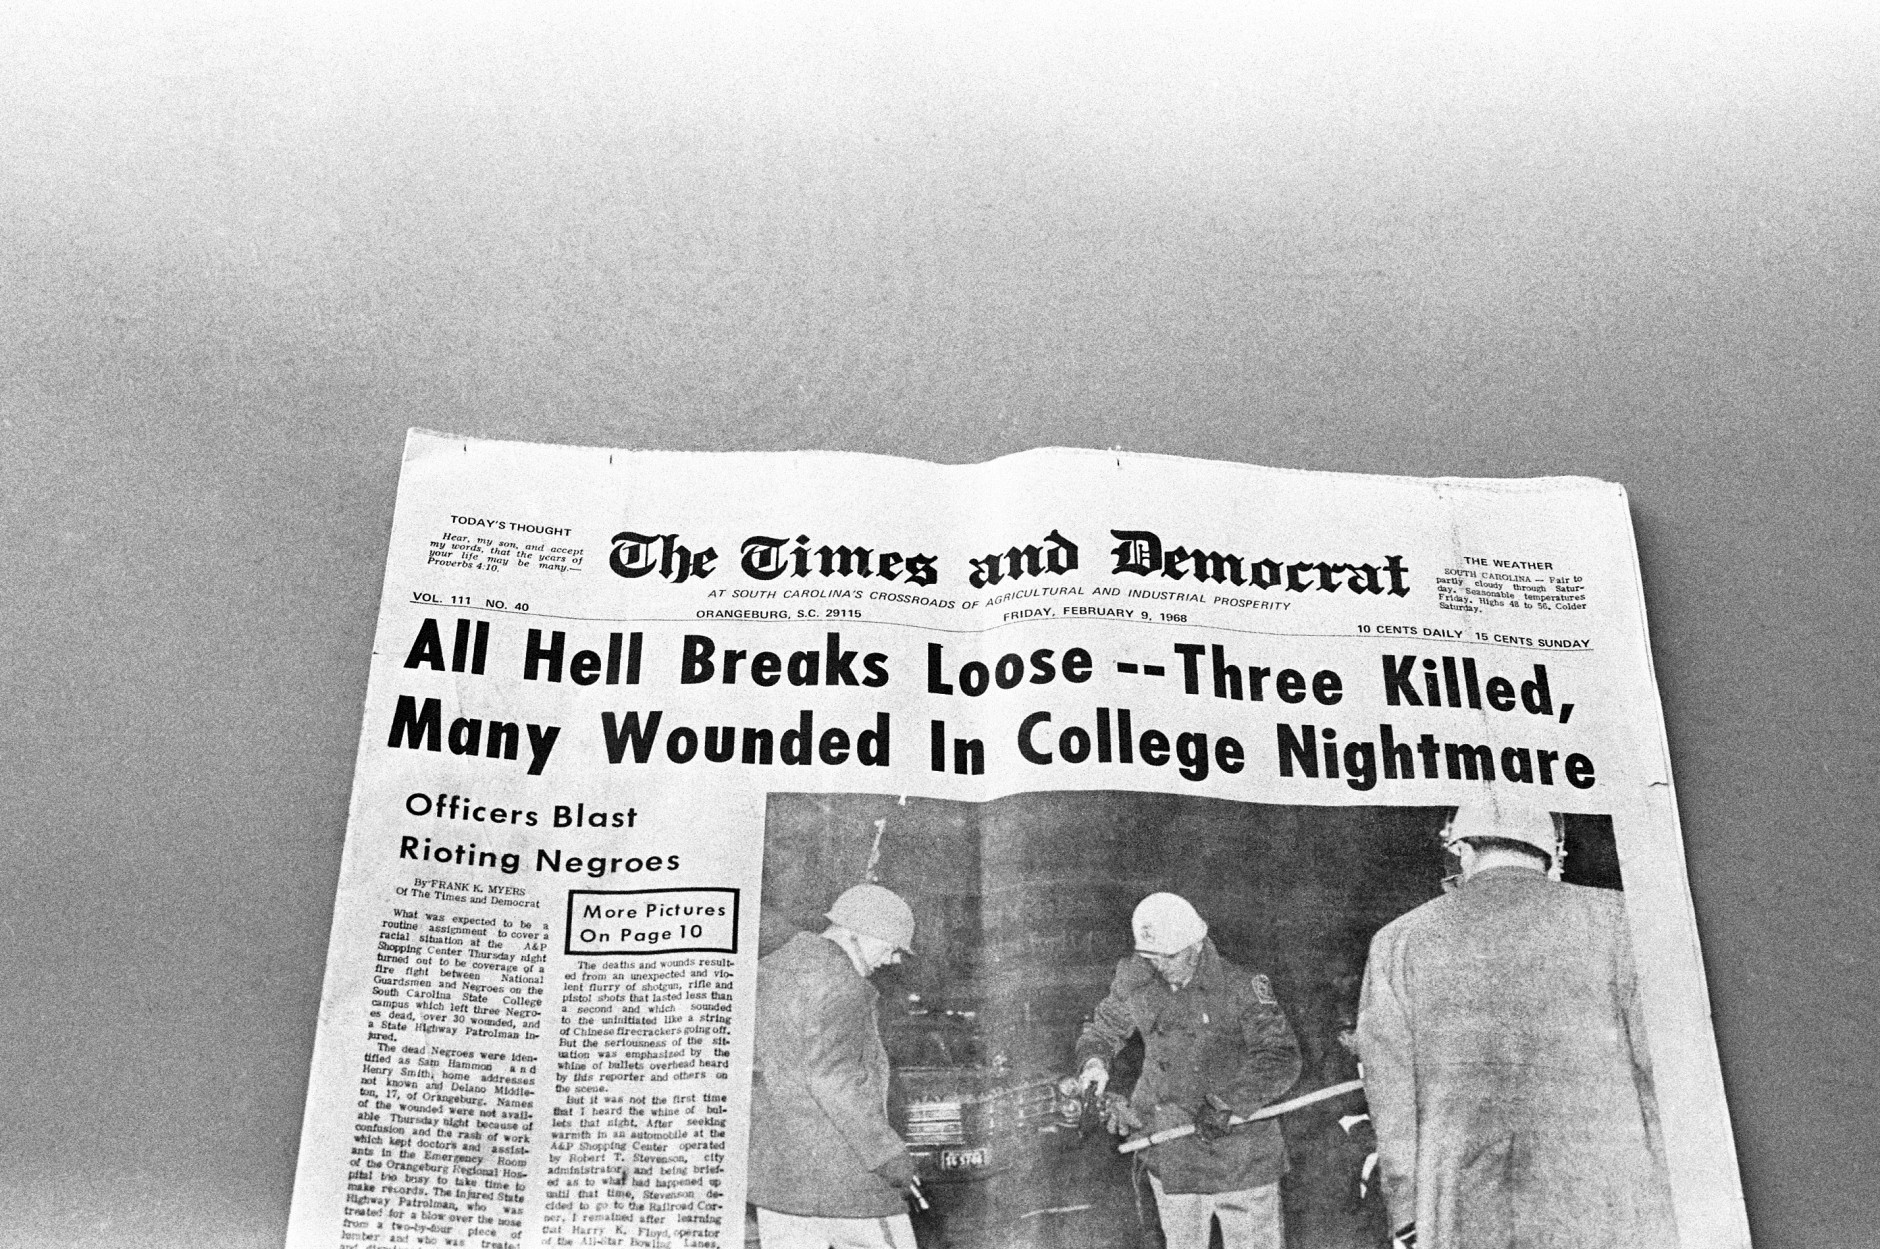 The Orangeburg, Times- Democrat newspaper hit the streets Friday, February 9, 1968 with these headlines after disastrous exchange of gunfire Thursday night between state police and rioting Black students at South Carolina State College. Three were killed and many wounded. (AP Photo)